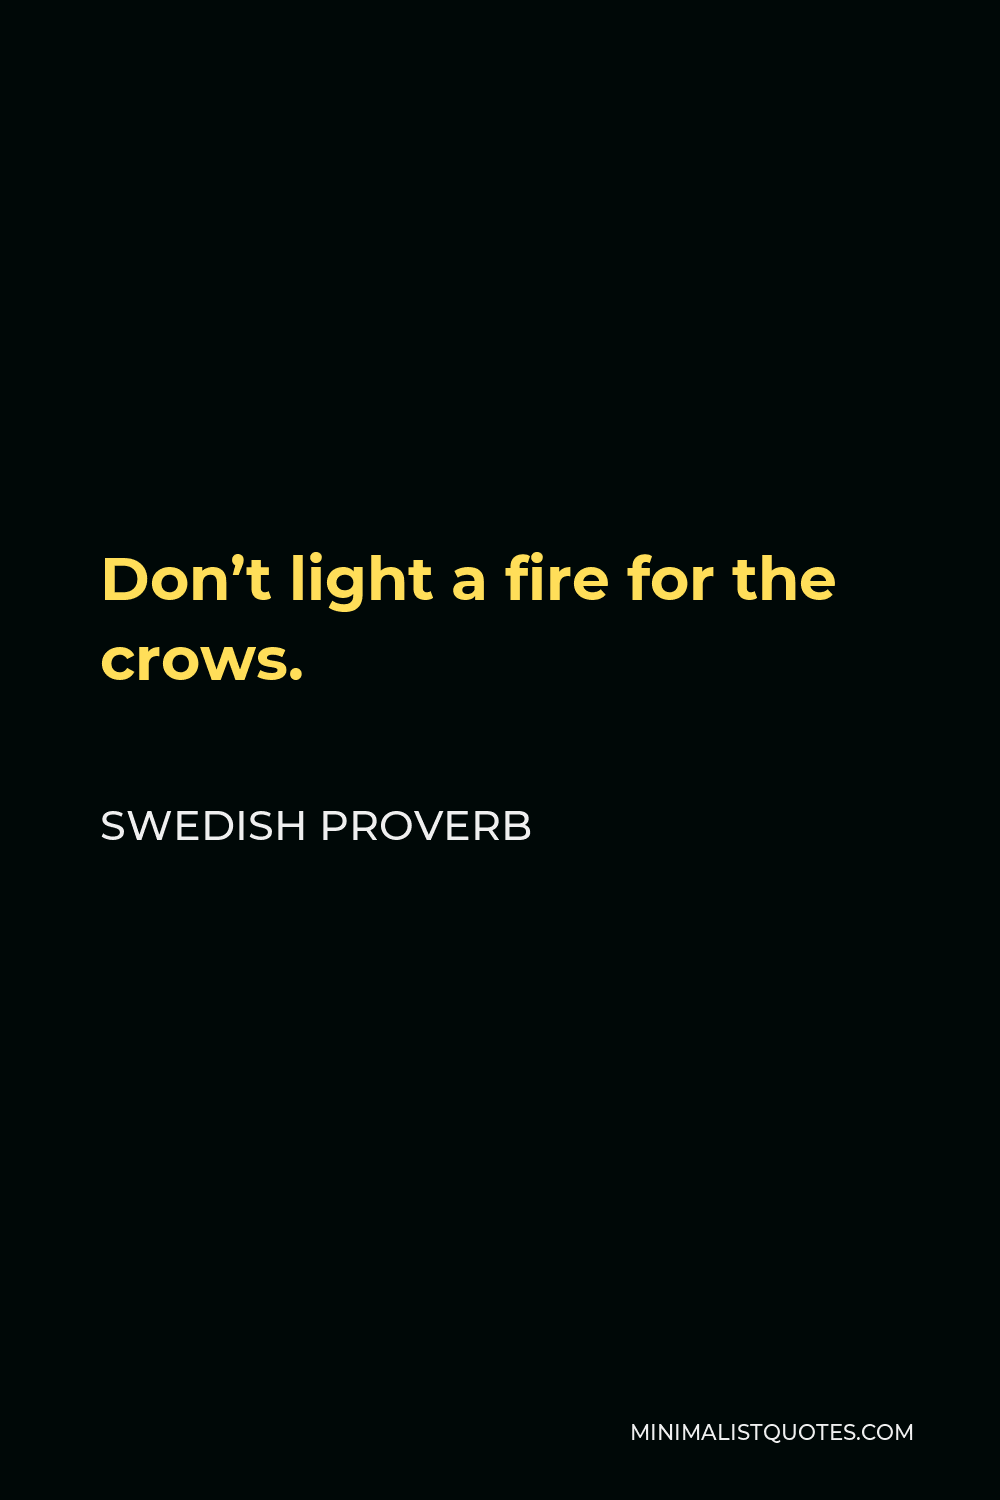 Swedish Proverb Quote - Don’t light a fire for the crows.